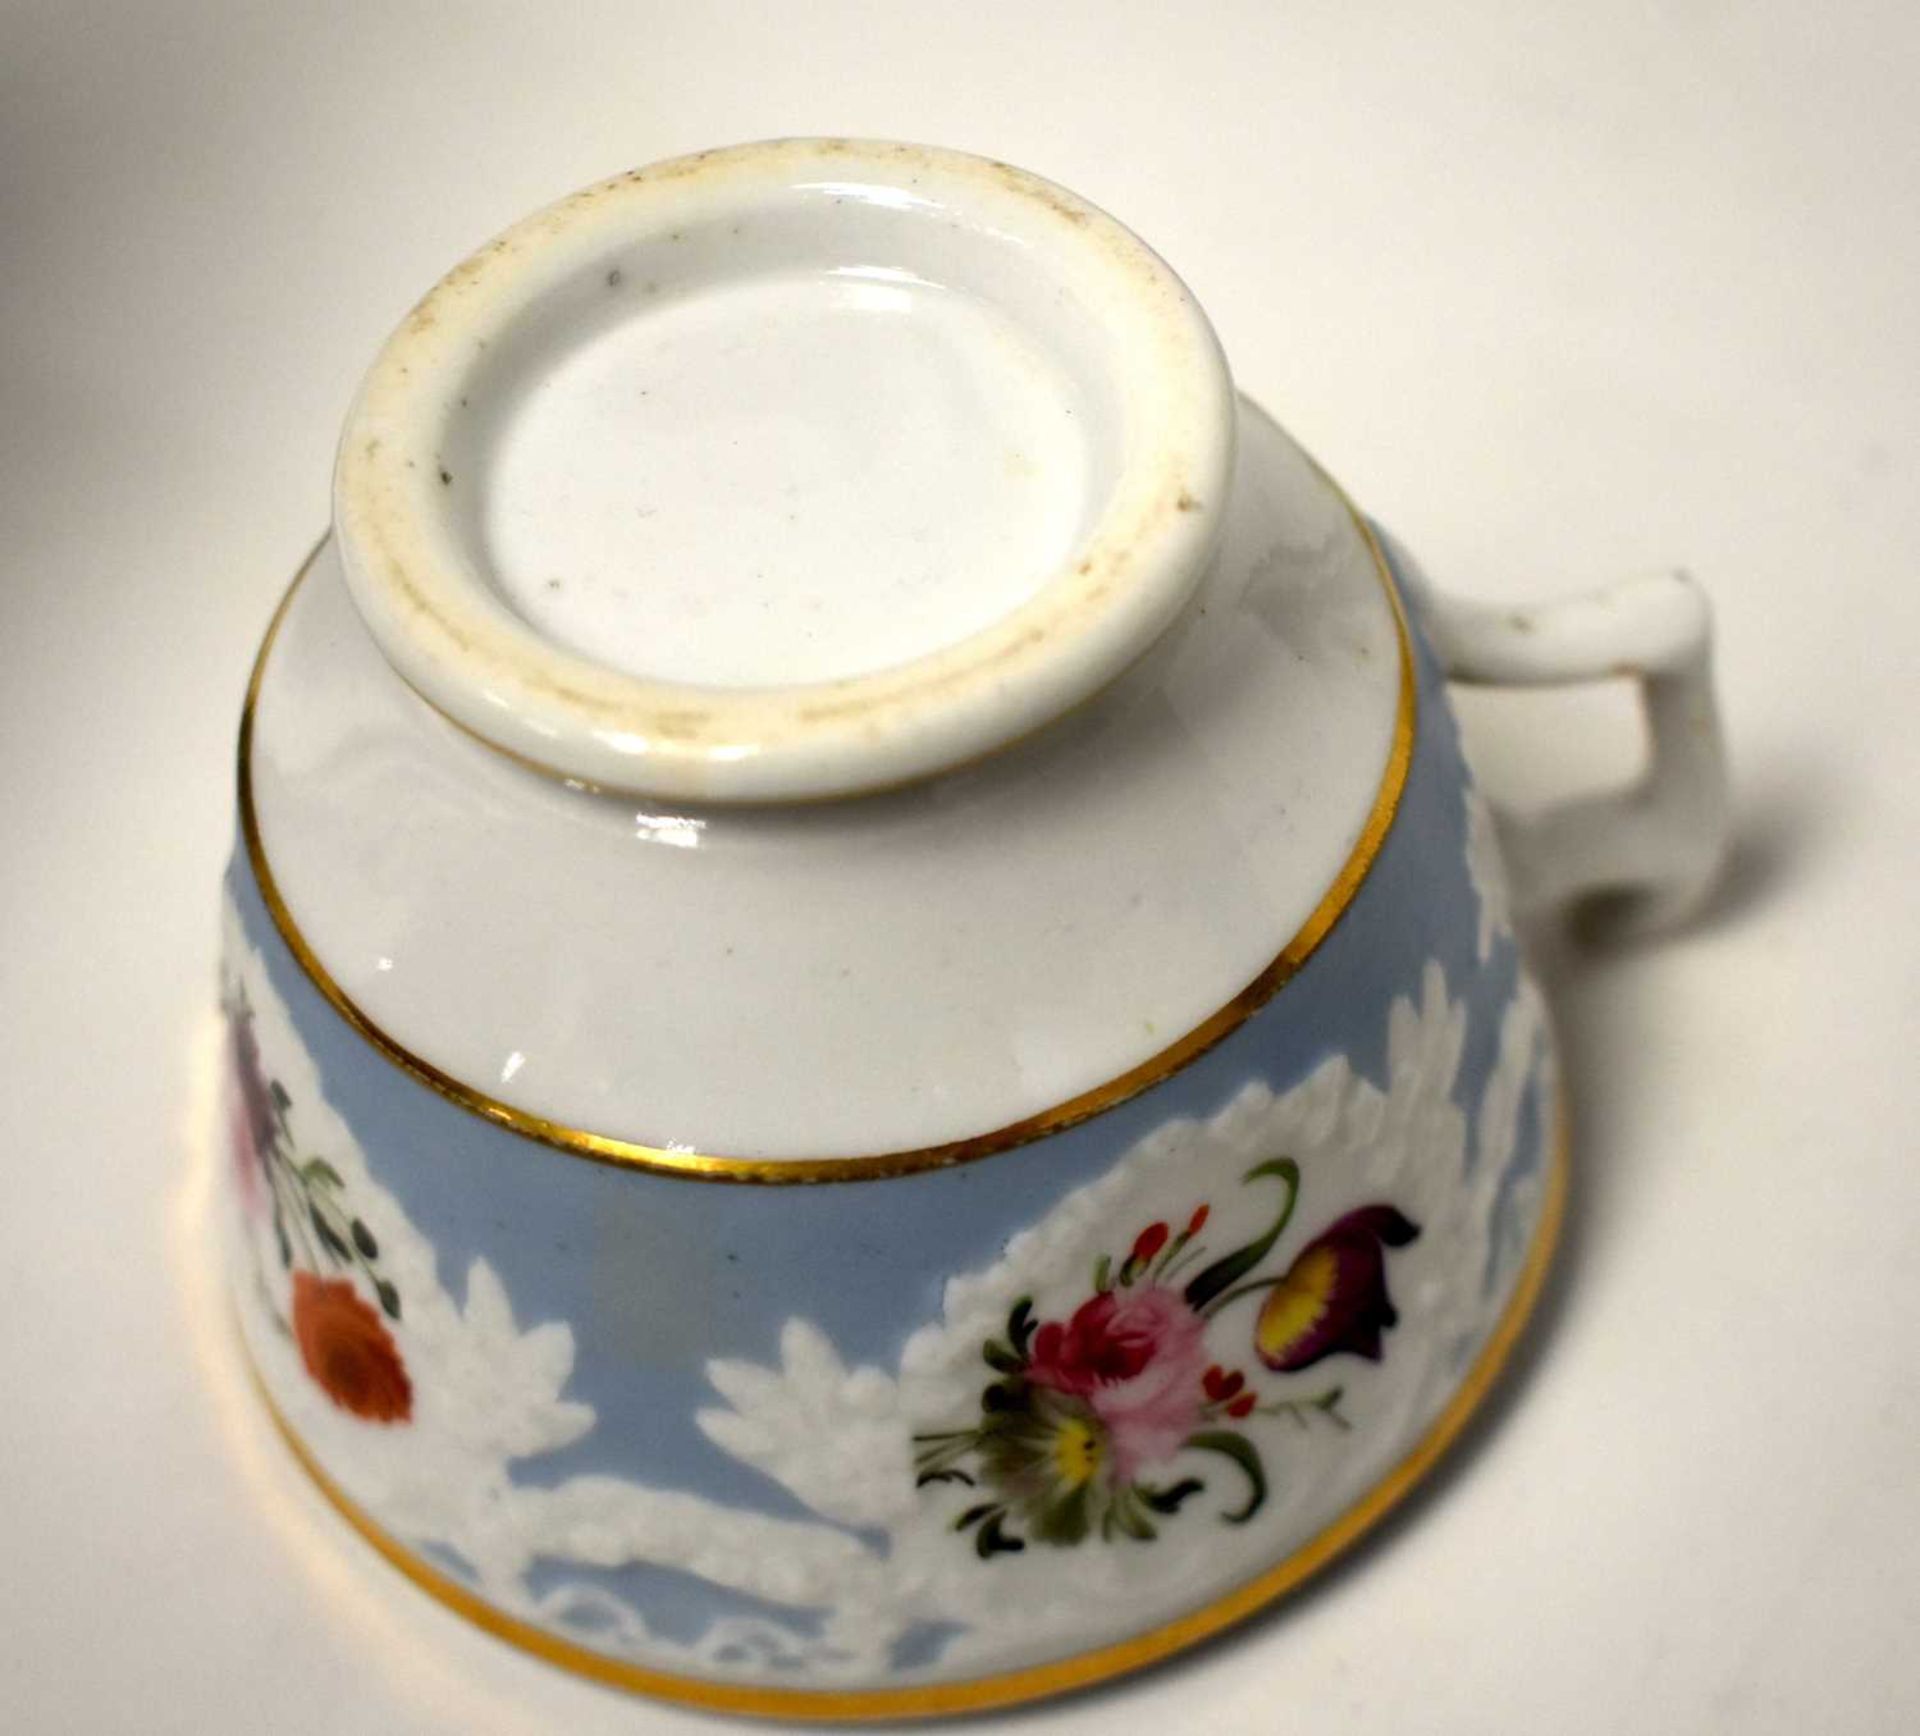 AN EARLY 19TH CENTURY CHAMBERLAINS WORCESTER PART TEASET painted with floral sprays, under a moulded - Image 27 of 36